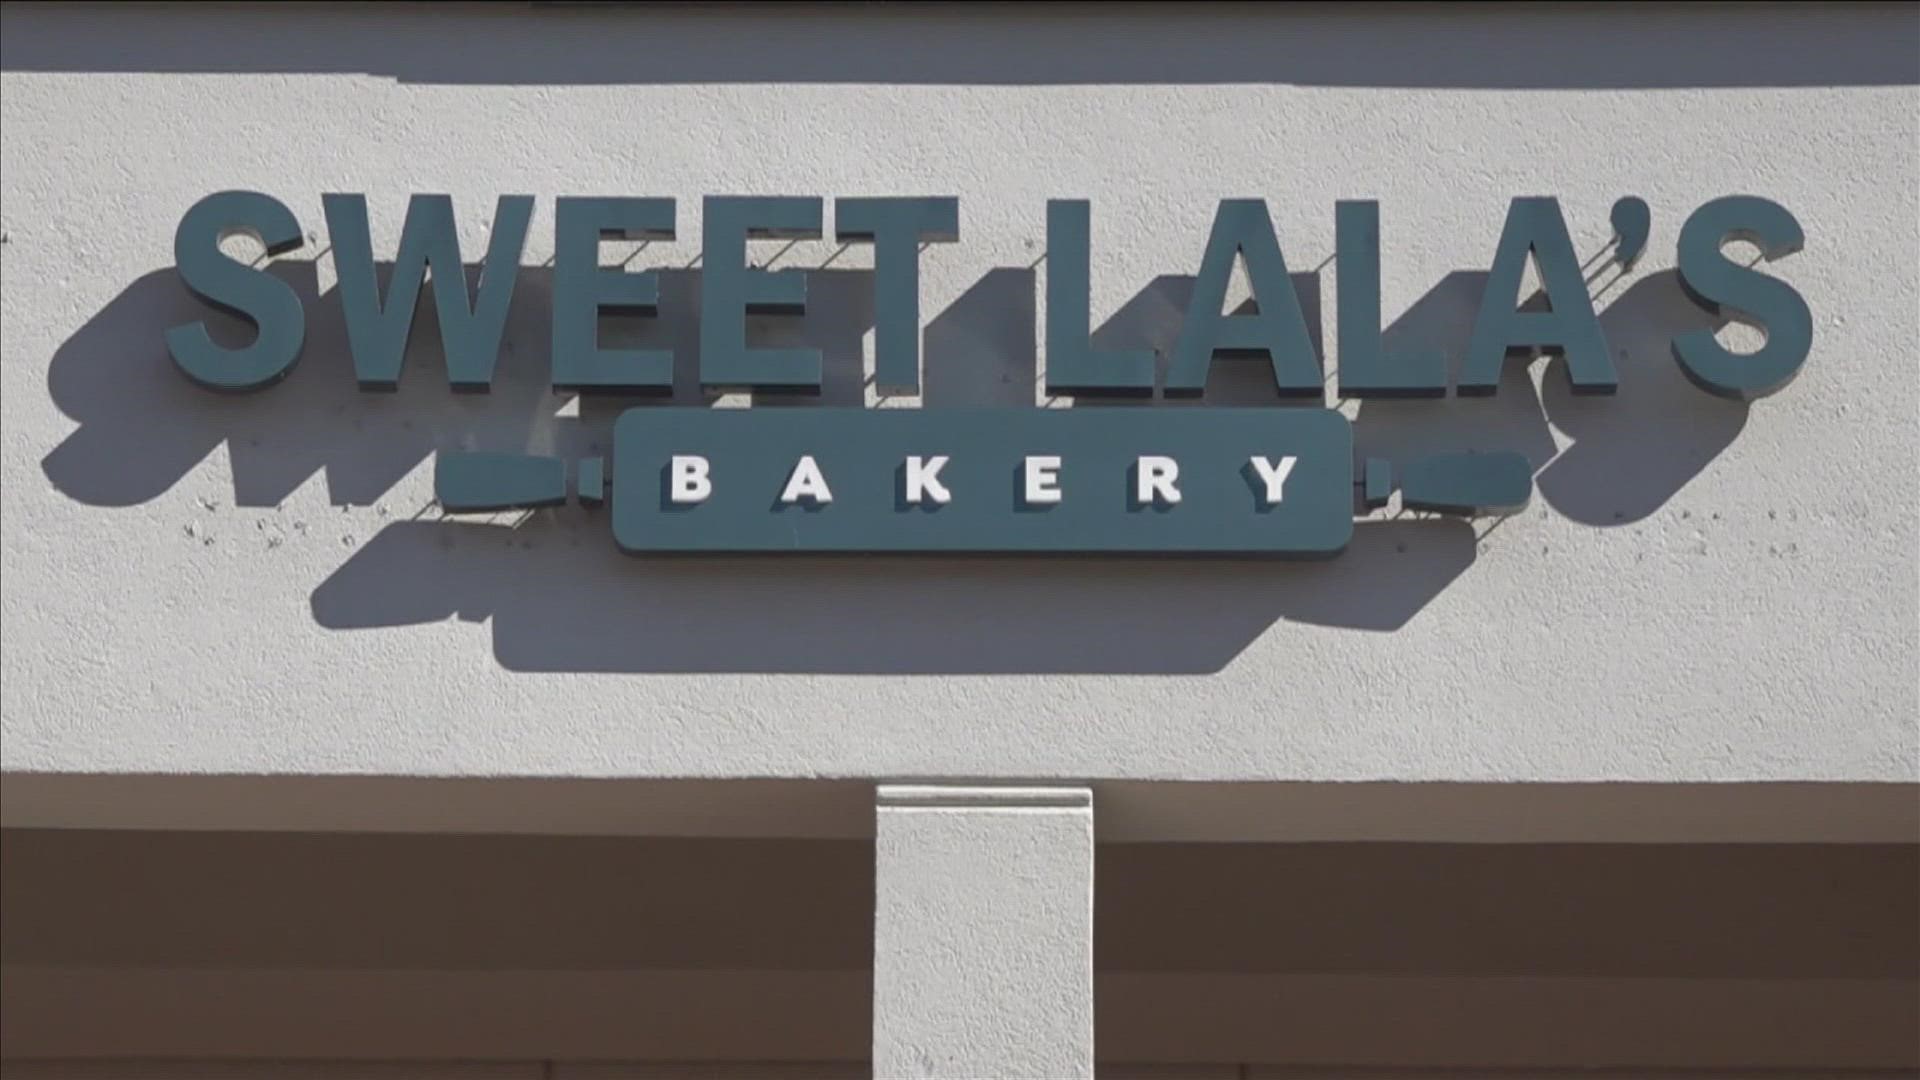 “Sweet Lala’s Bakery is a place that we created to have gathering for families, for community members. It originated in a cookie business,” said Lauren.